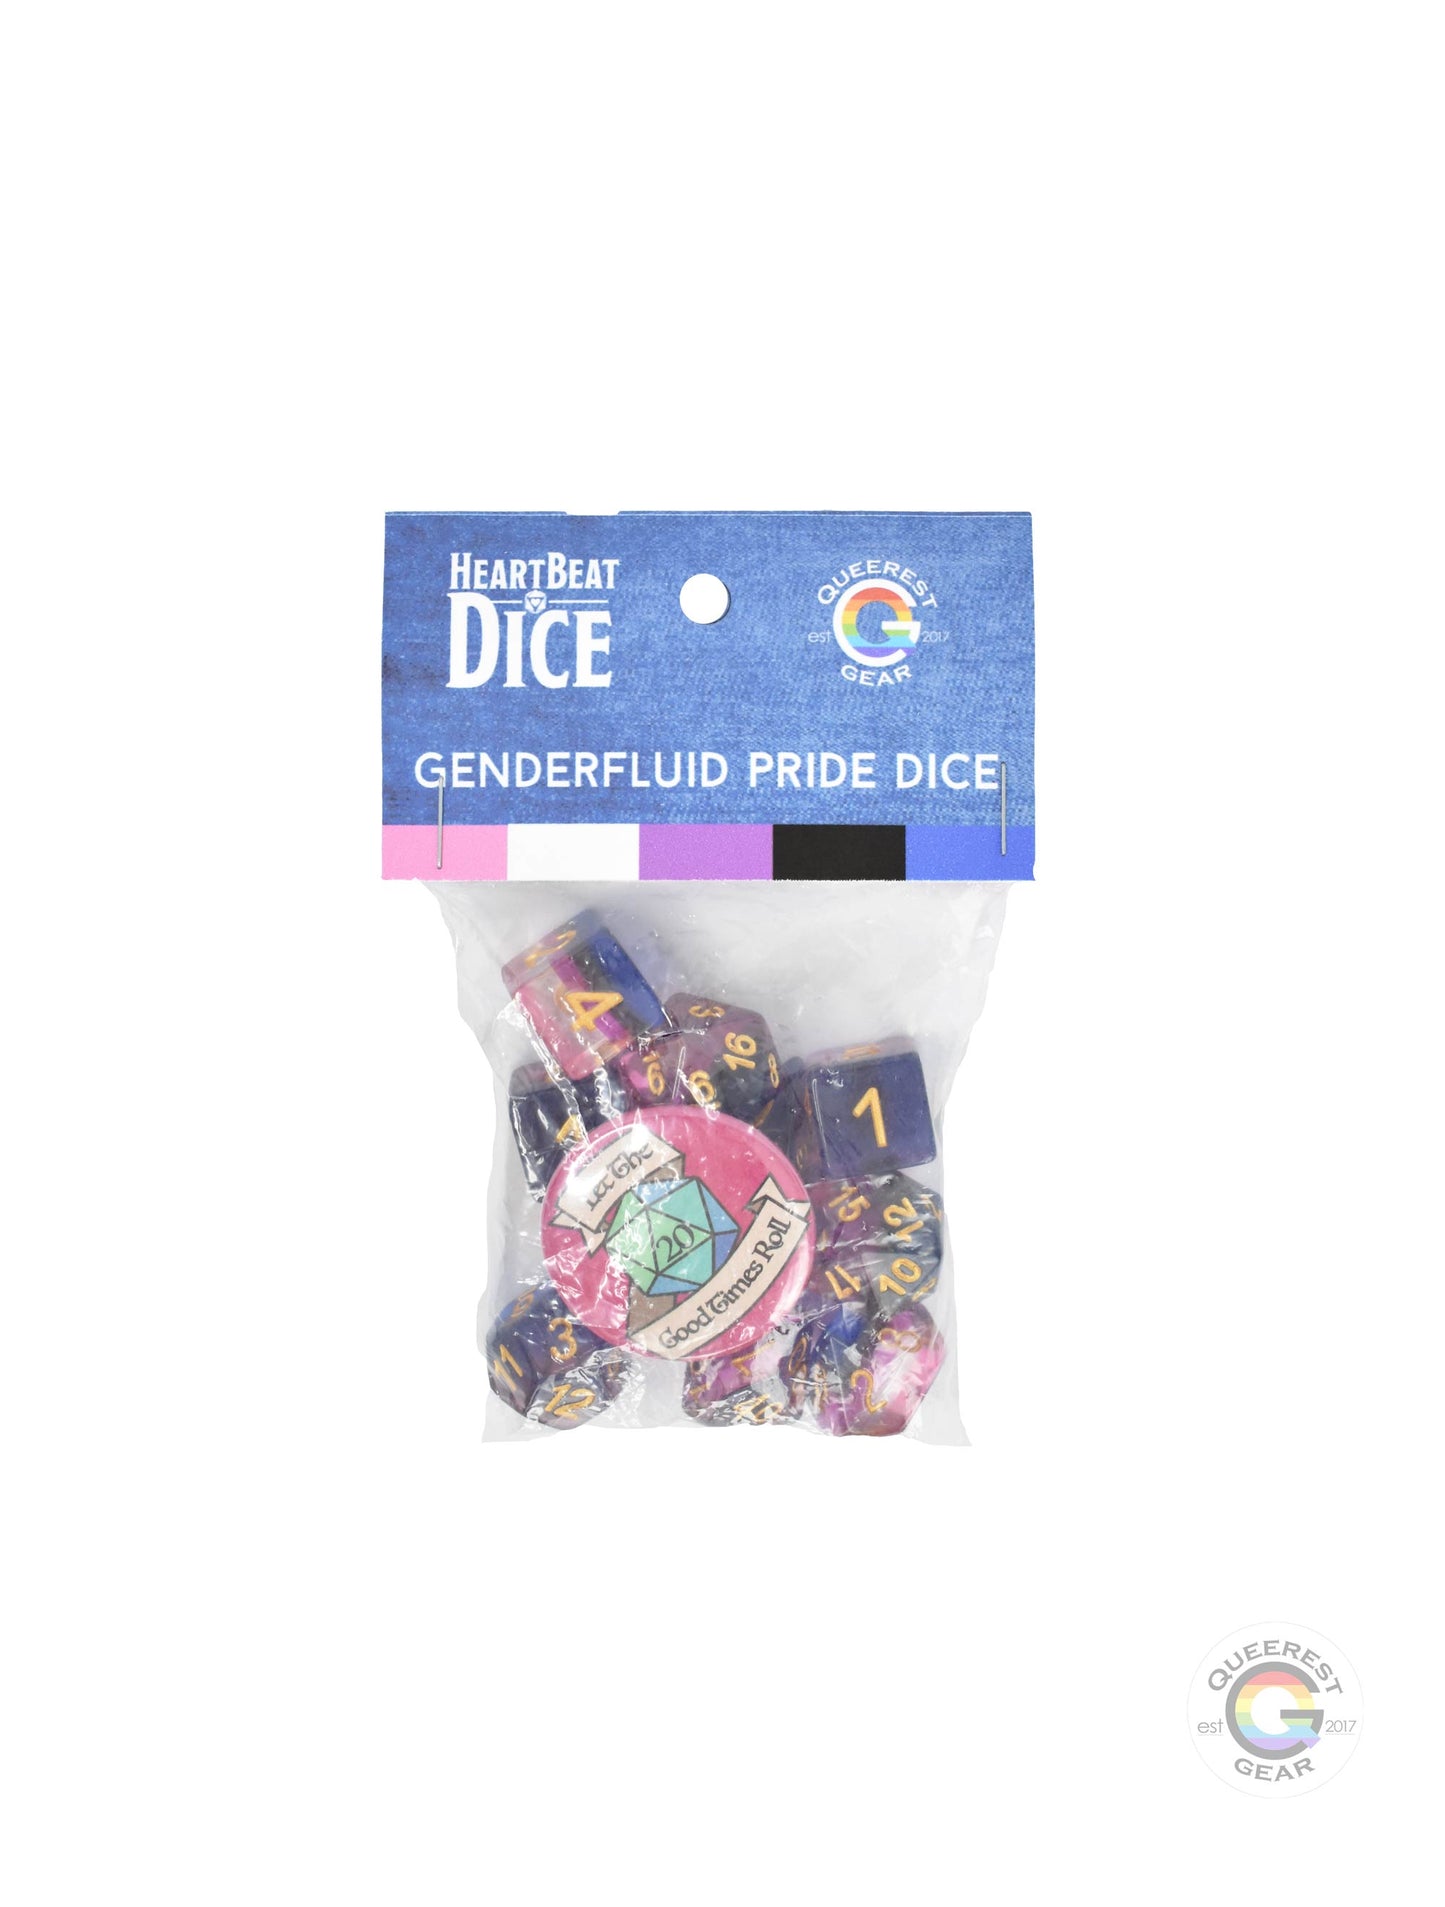 Genderfluid pride dice in their packaging with a free “let the good times roll” button